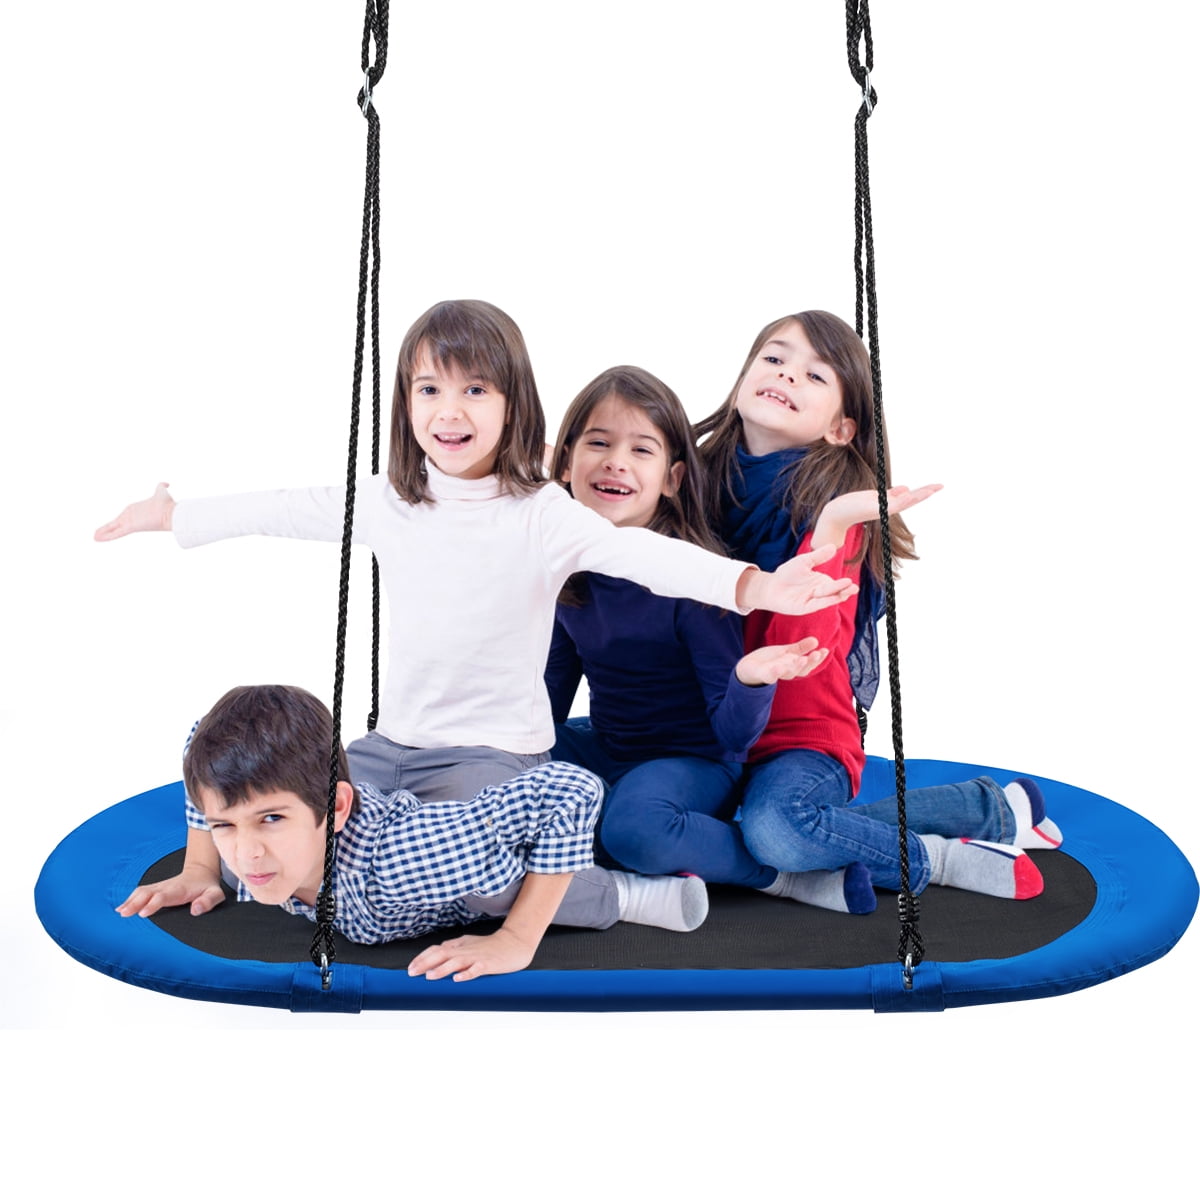 Easy to Hang Quick Dry Backyard or Playground Adventure Hanging Circle Round CTSC Saucer Kids 40 Tree Swing for Outside Heavy-Duty Waterproof Fabric Nest Swing Green